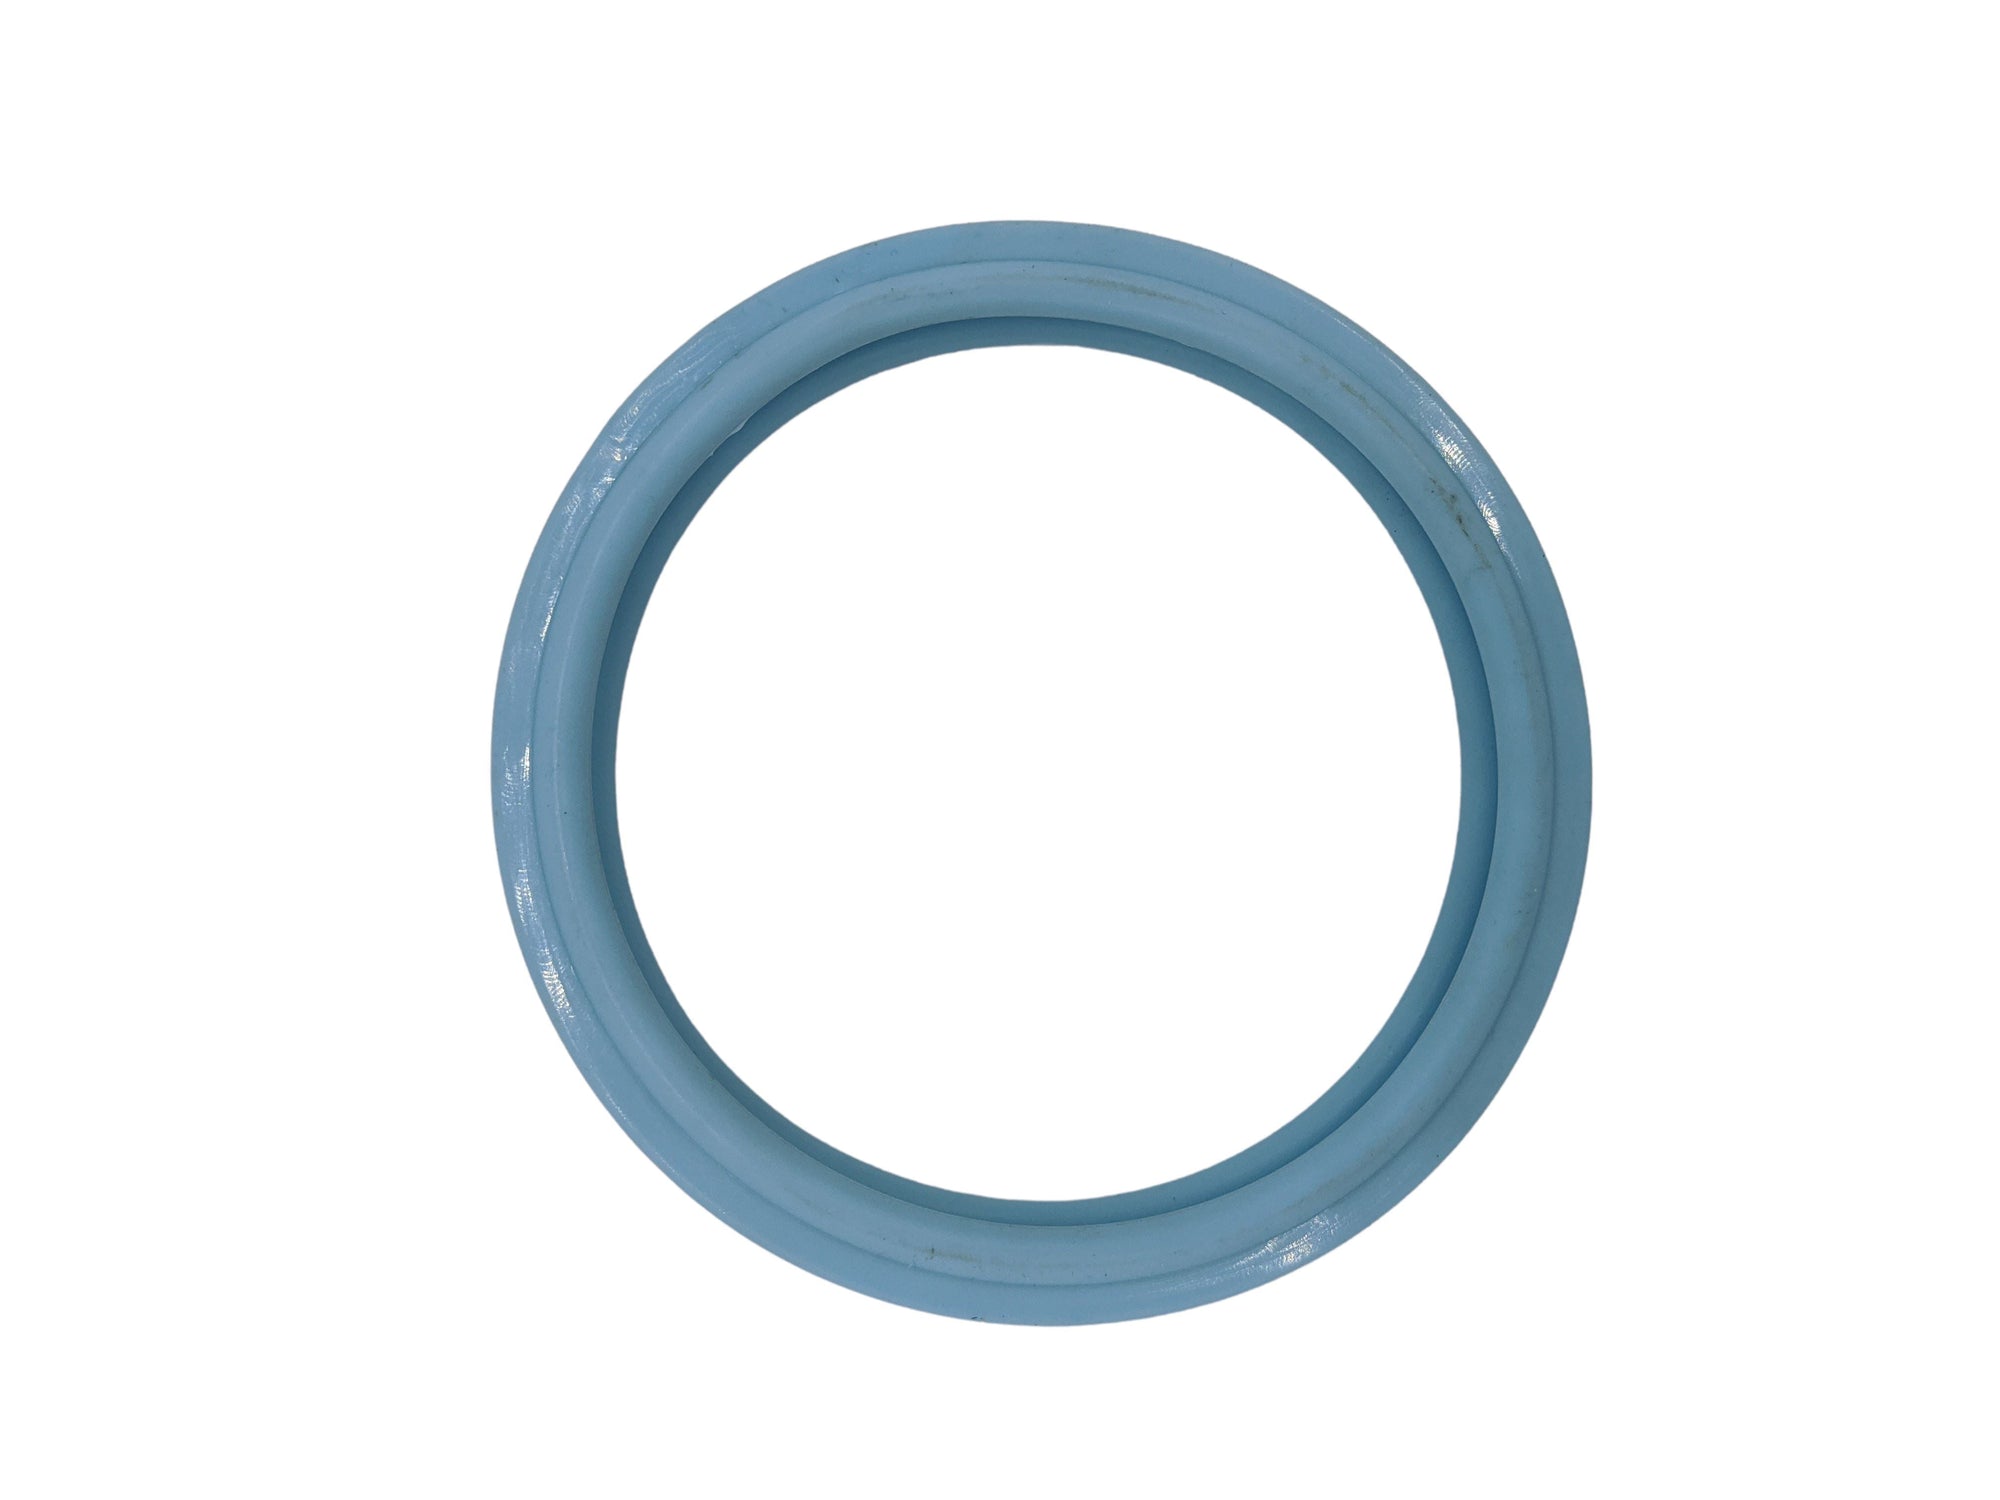 PoolTone 4 Inch Silicone Gasket LPL-M-G-P for Pentair 79108500 SpaBrite AquaLight Spa Light Home & Garden > Pool & Spa Pentair 